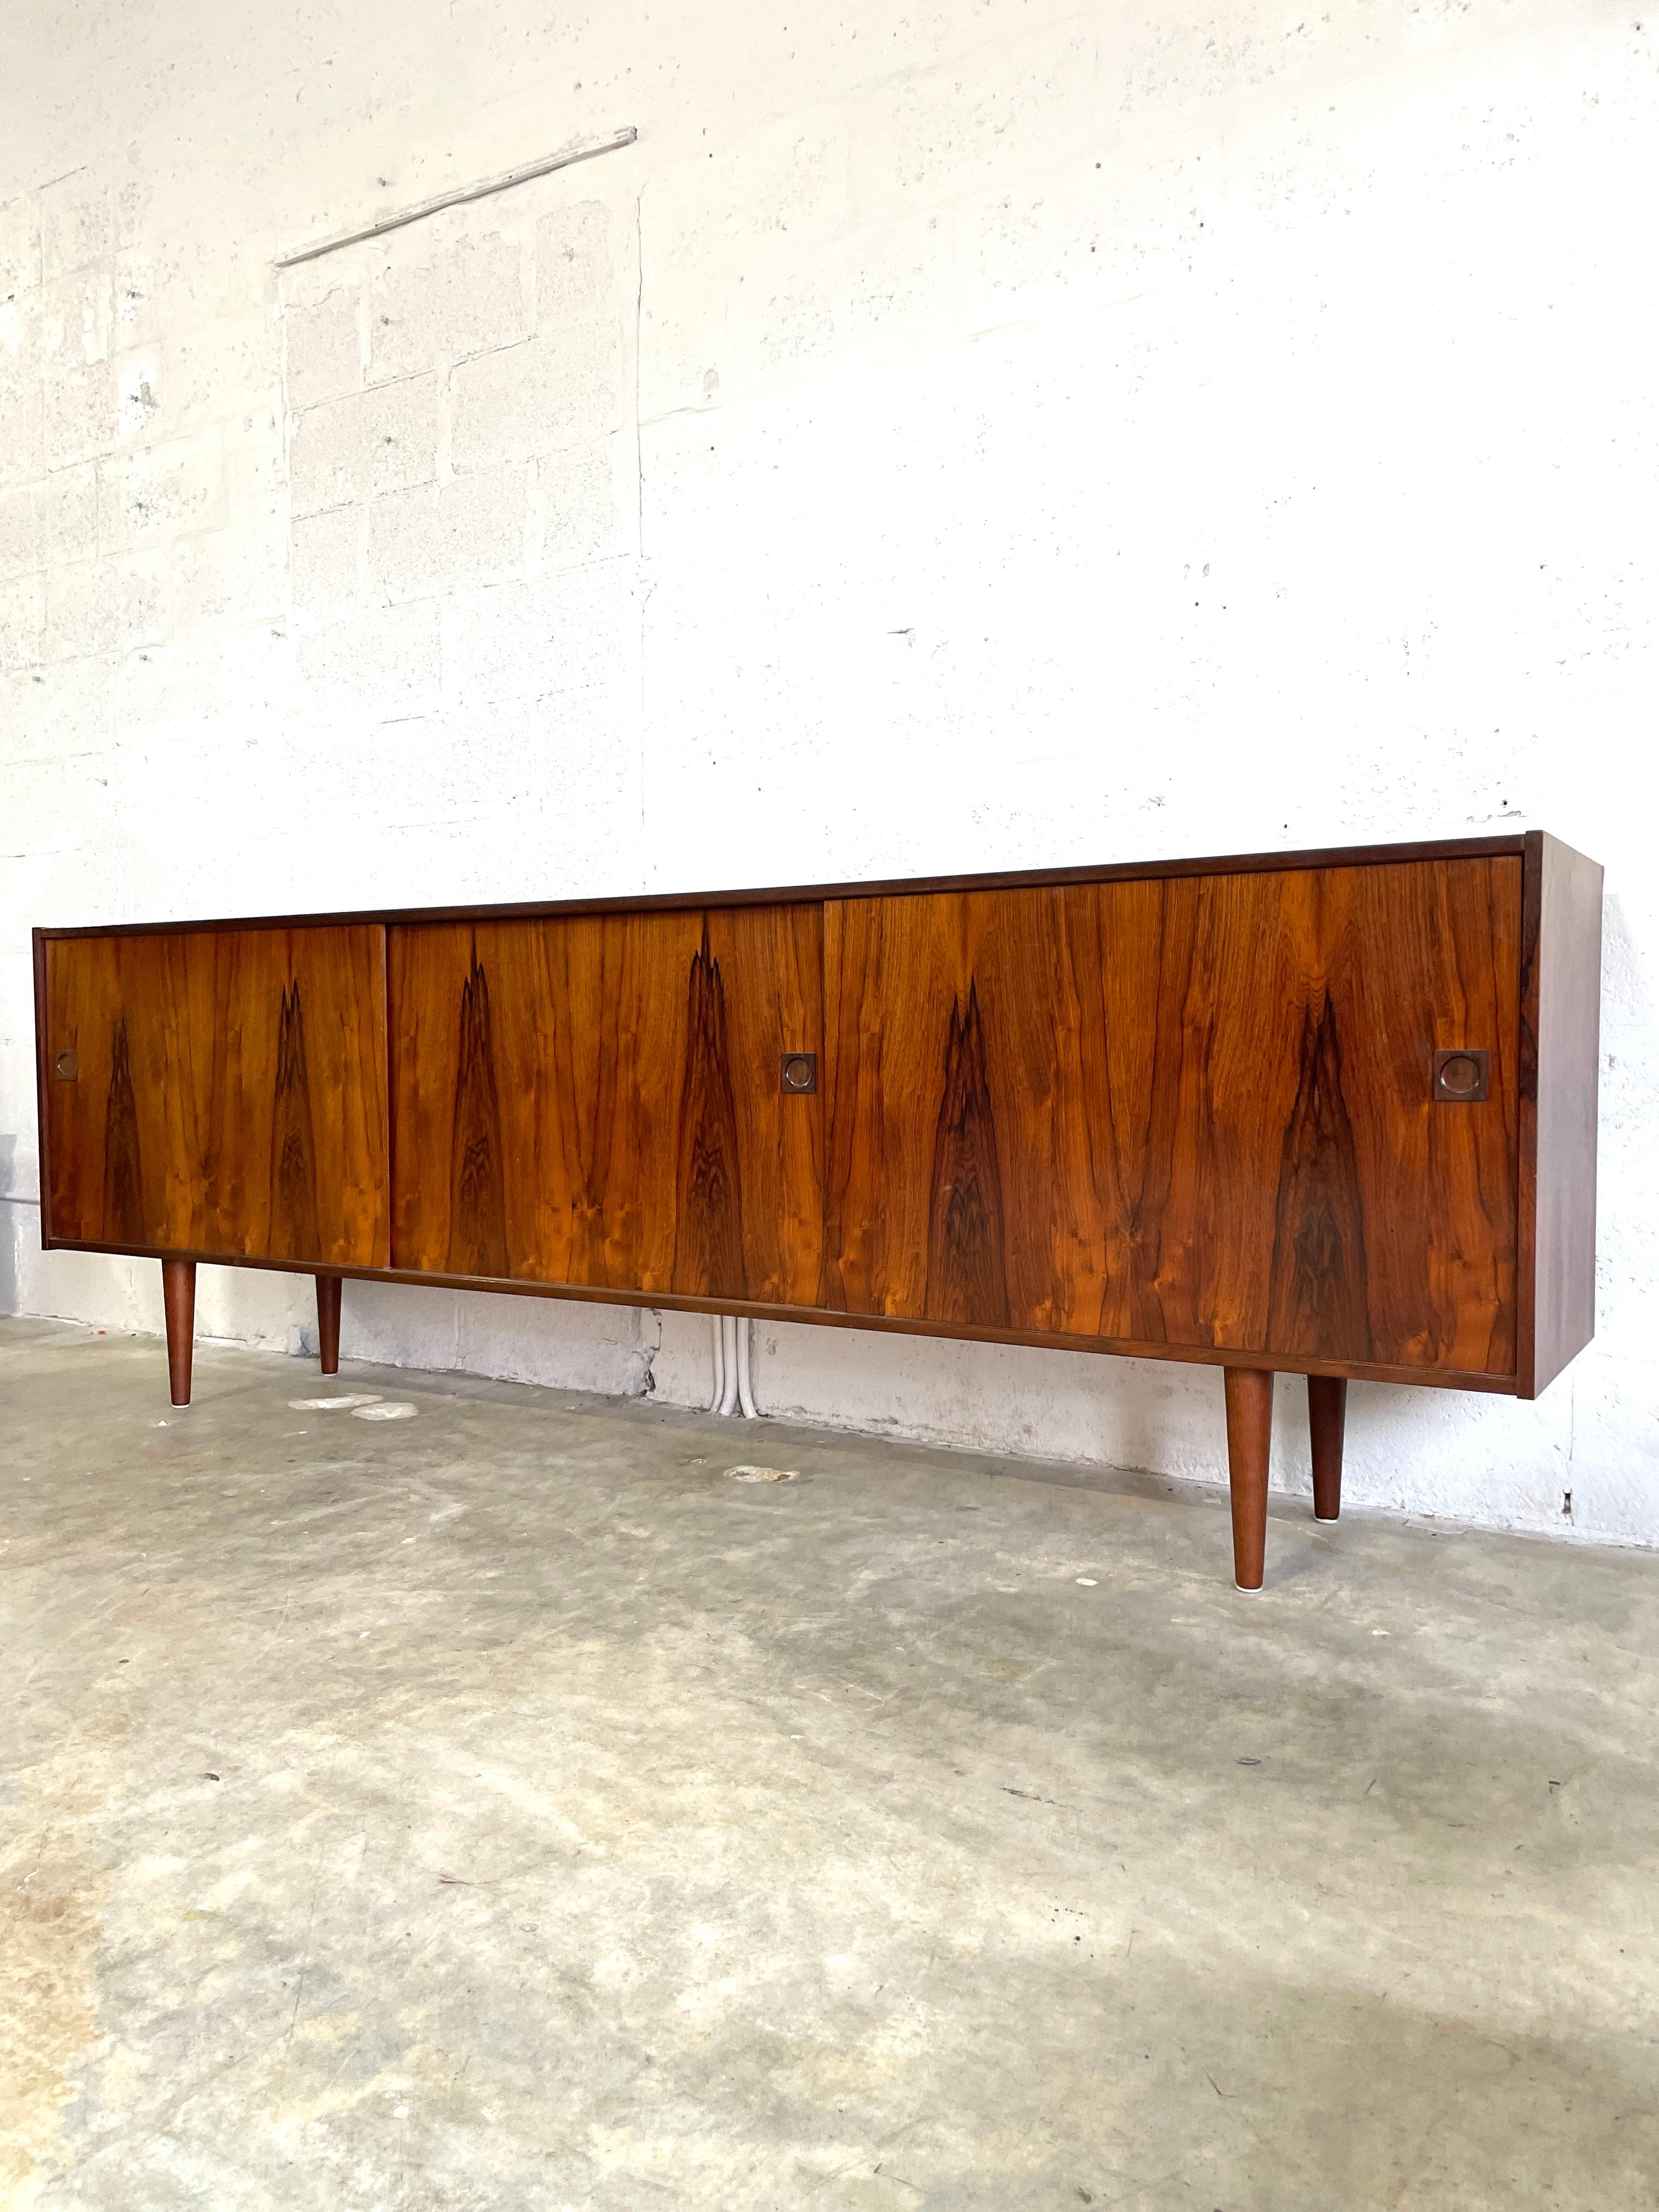 Danish Modern Rosewood Long Credenza or Media Console In Good Condition For Sale In Fort Lauderdale, FL